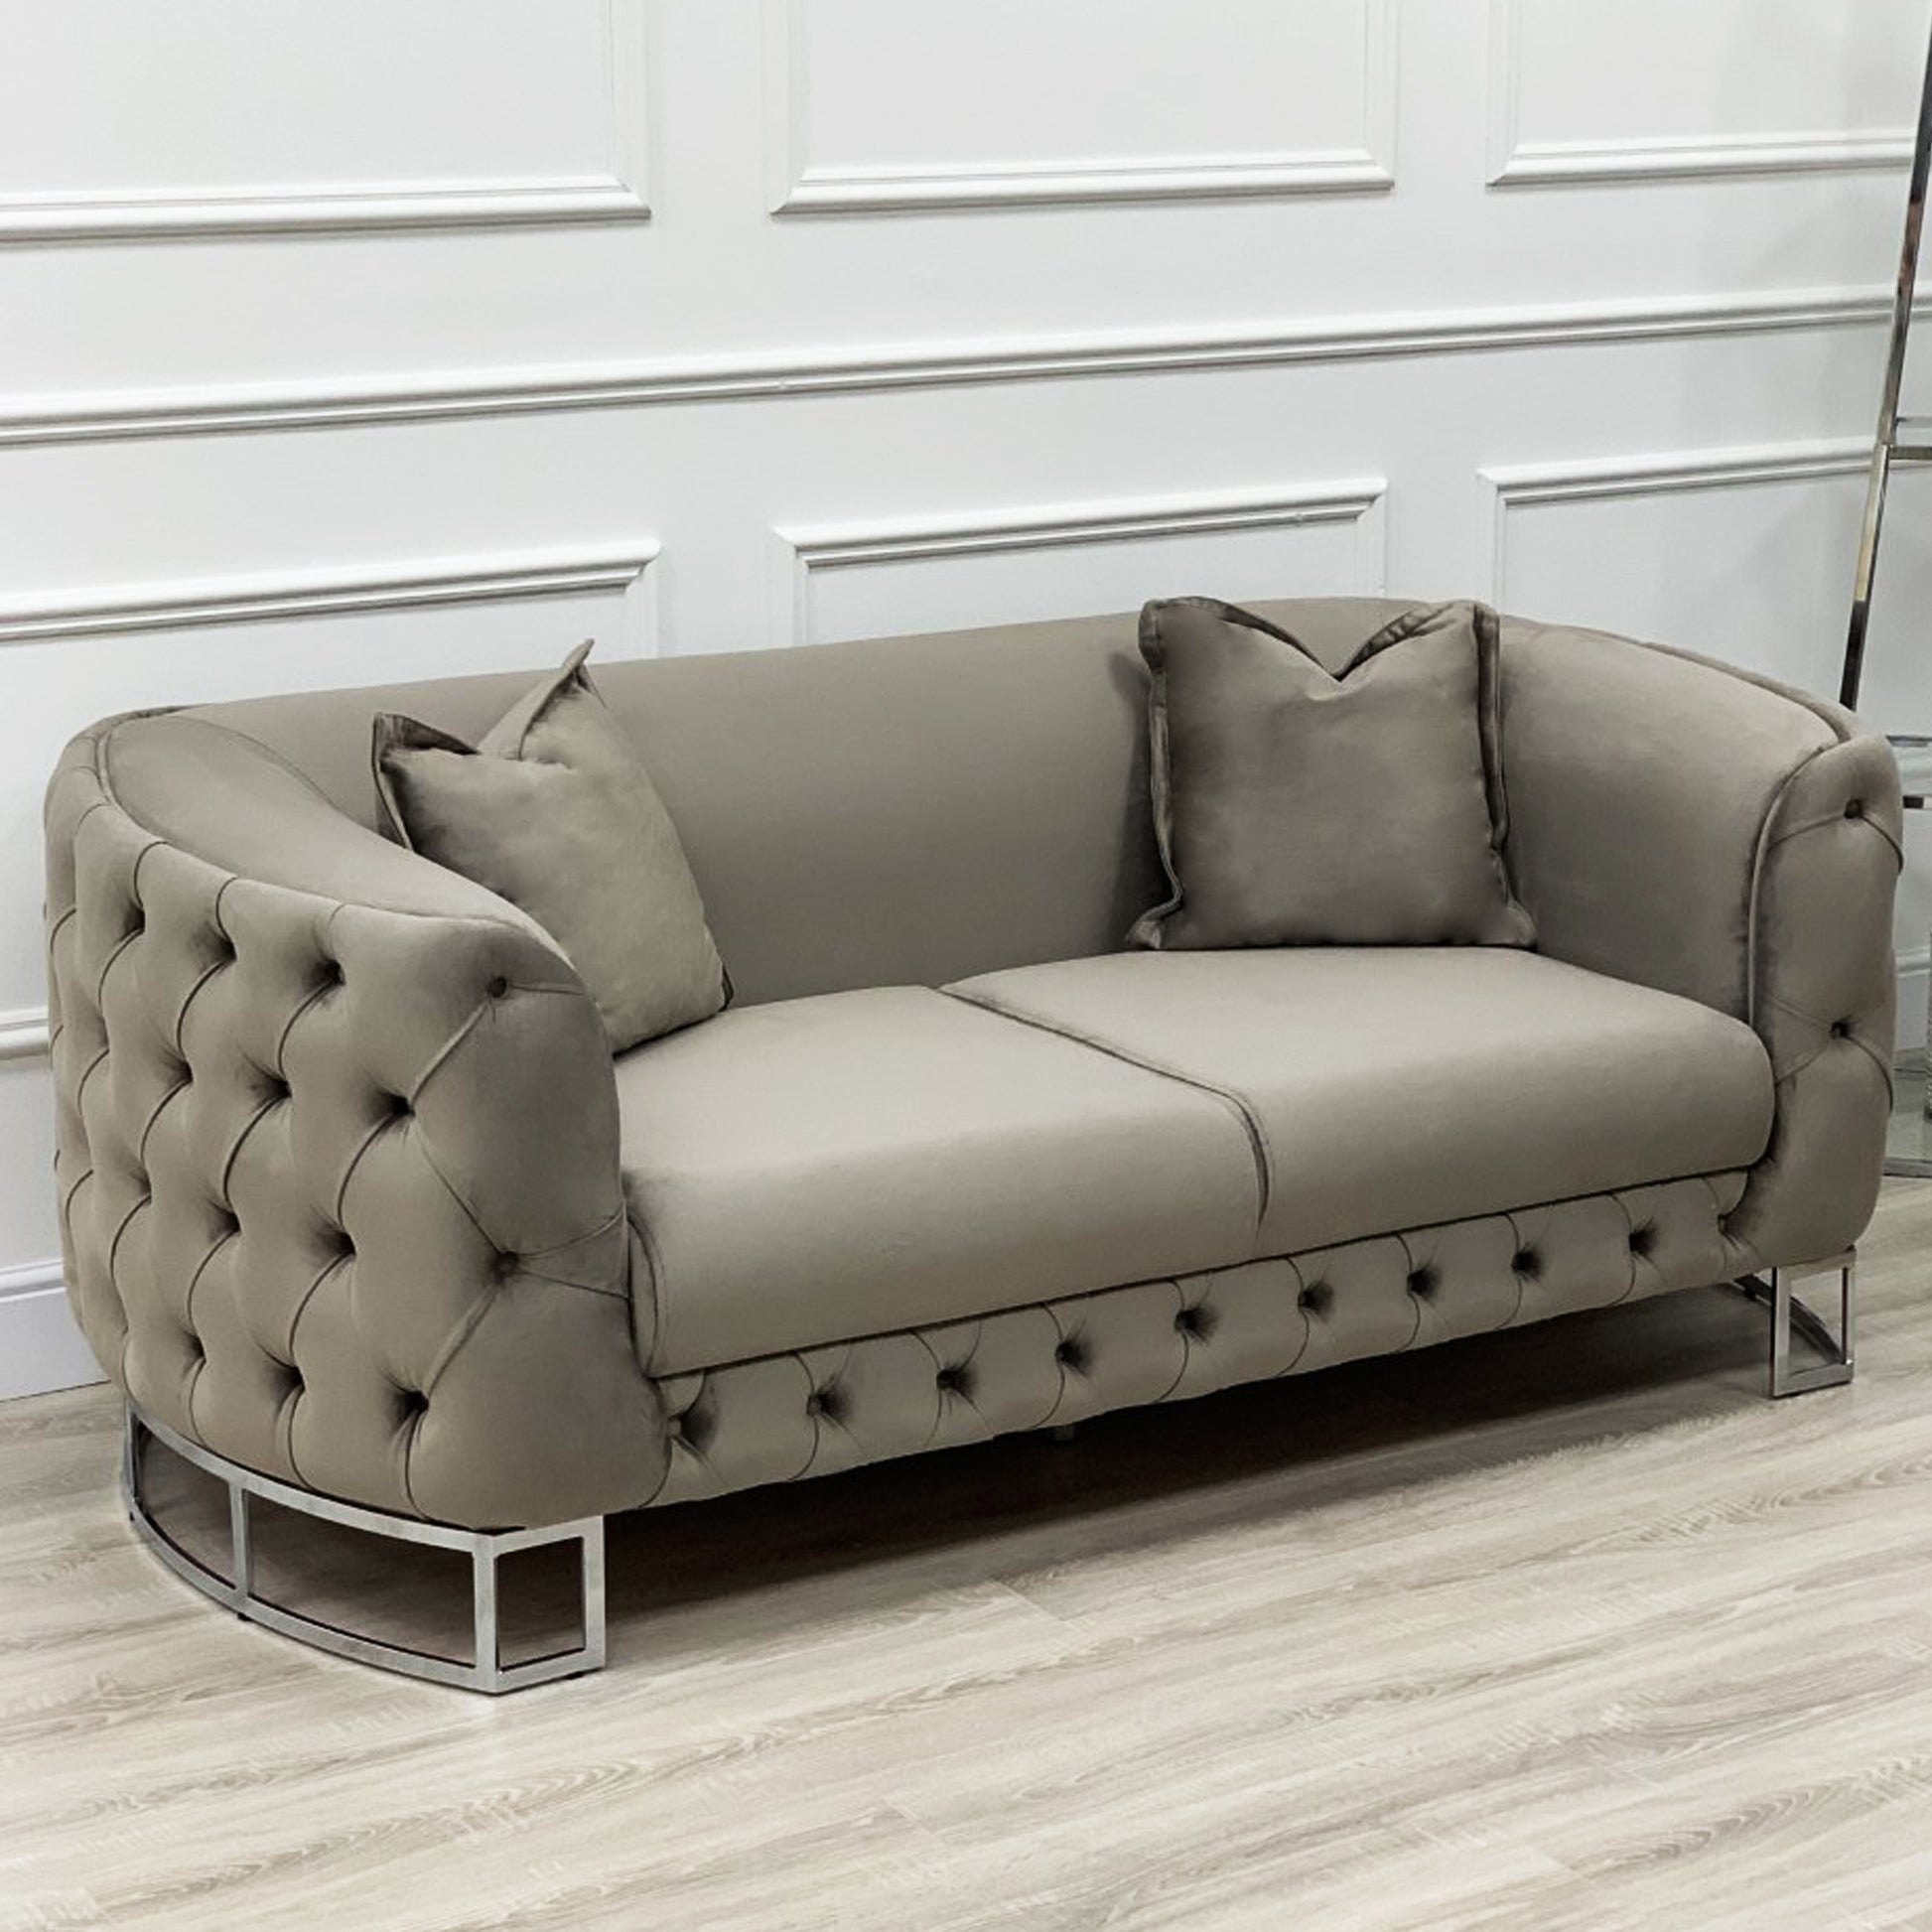 Truffle Velvet Curved Sofa with Silver Legs 2 seater